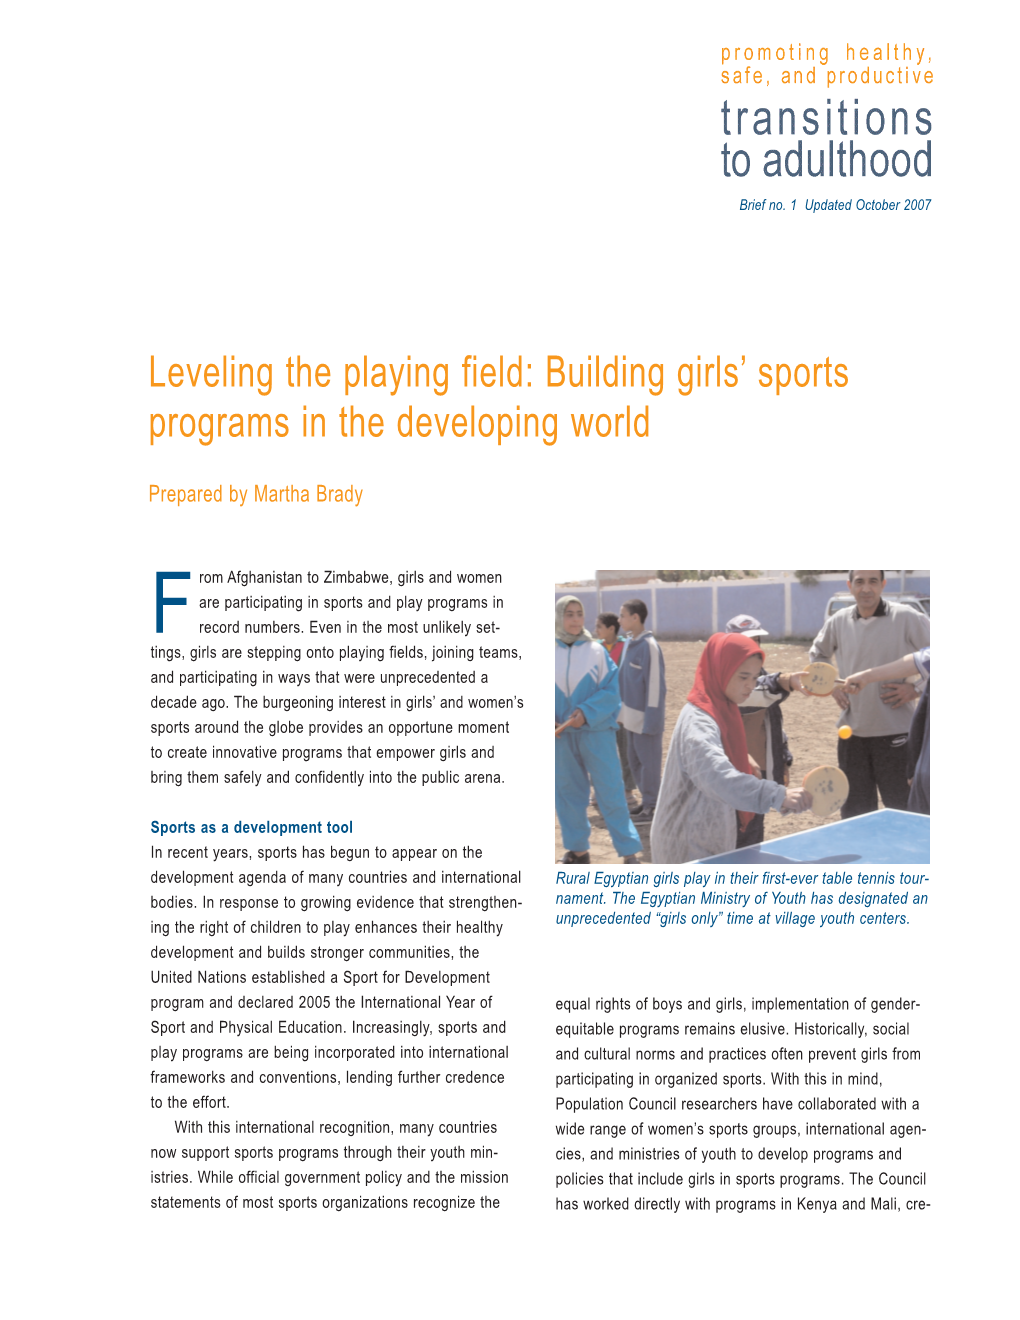 Leveling the Playing Field: Building Girls' Sports Programs in the Developing World